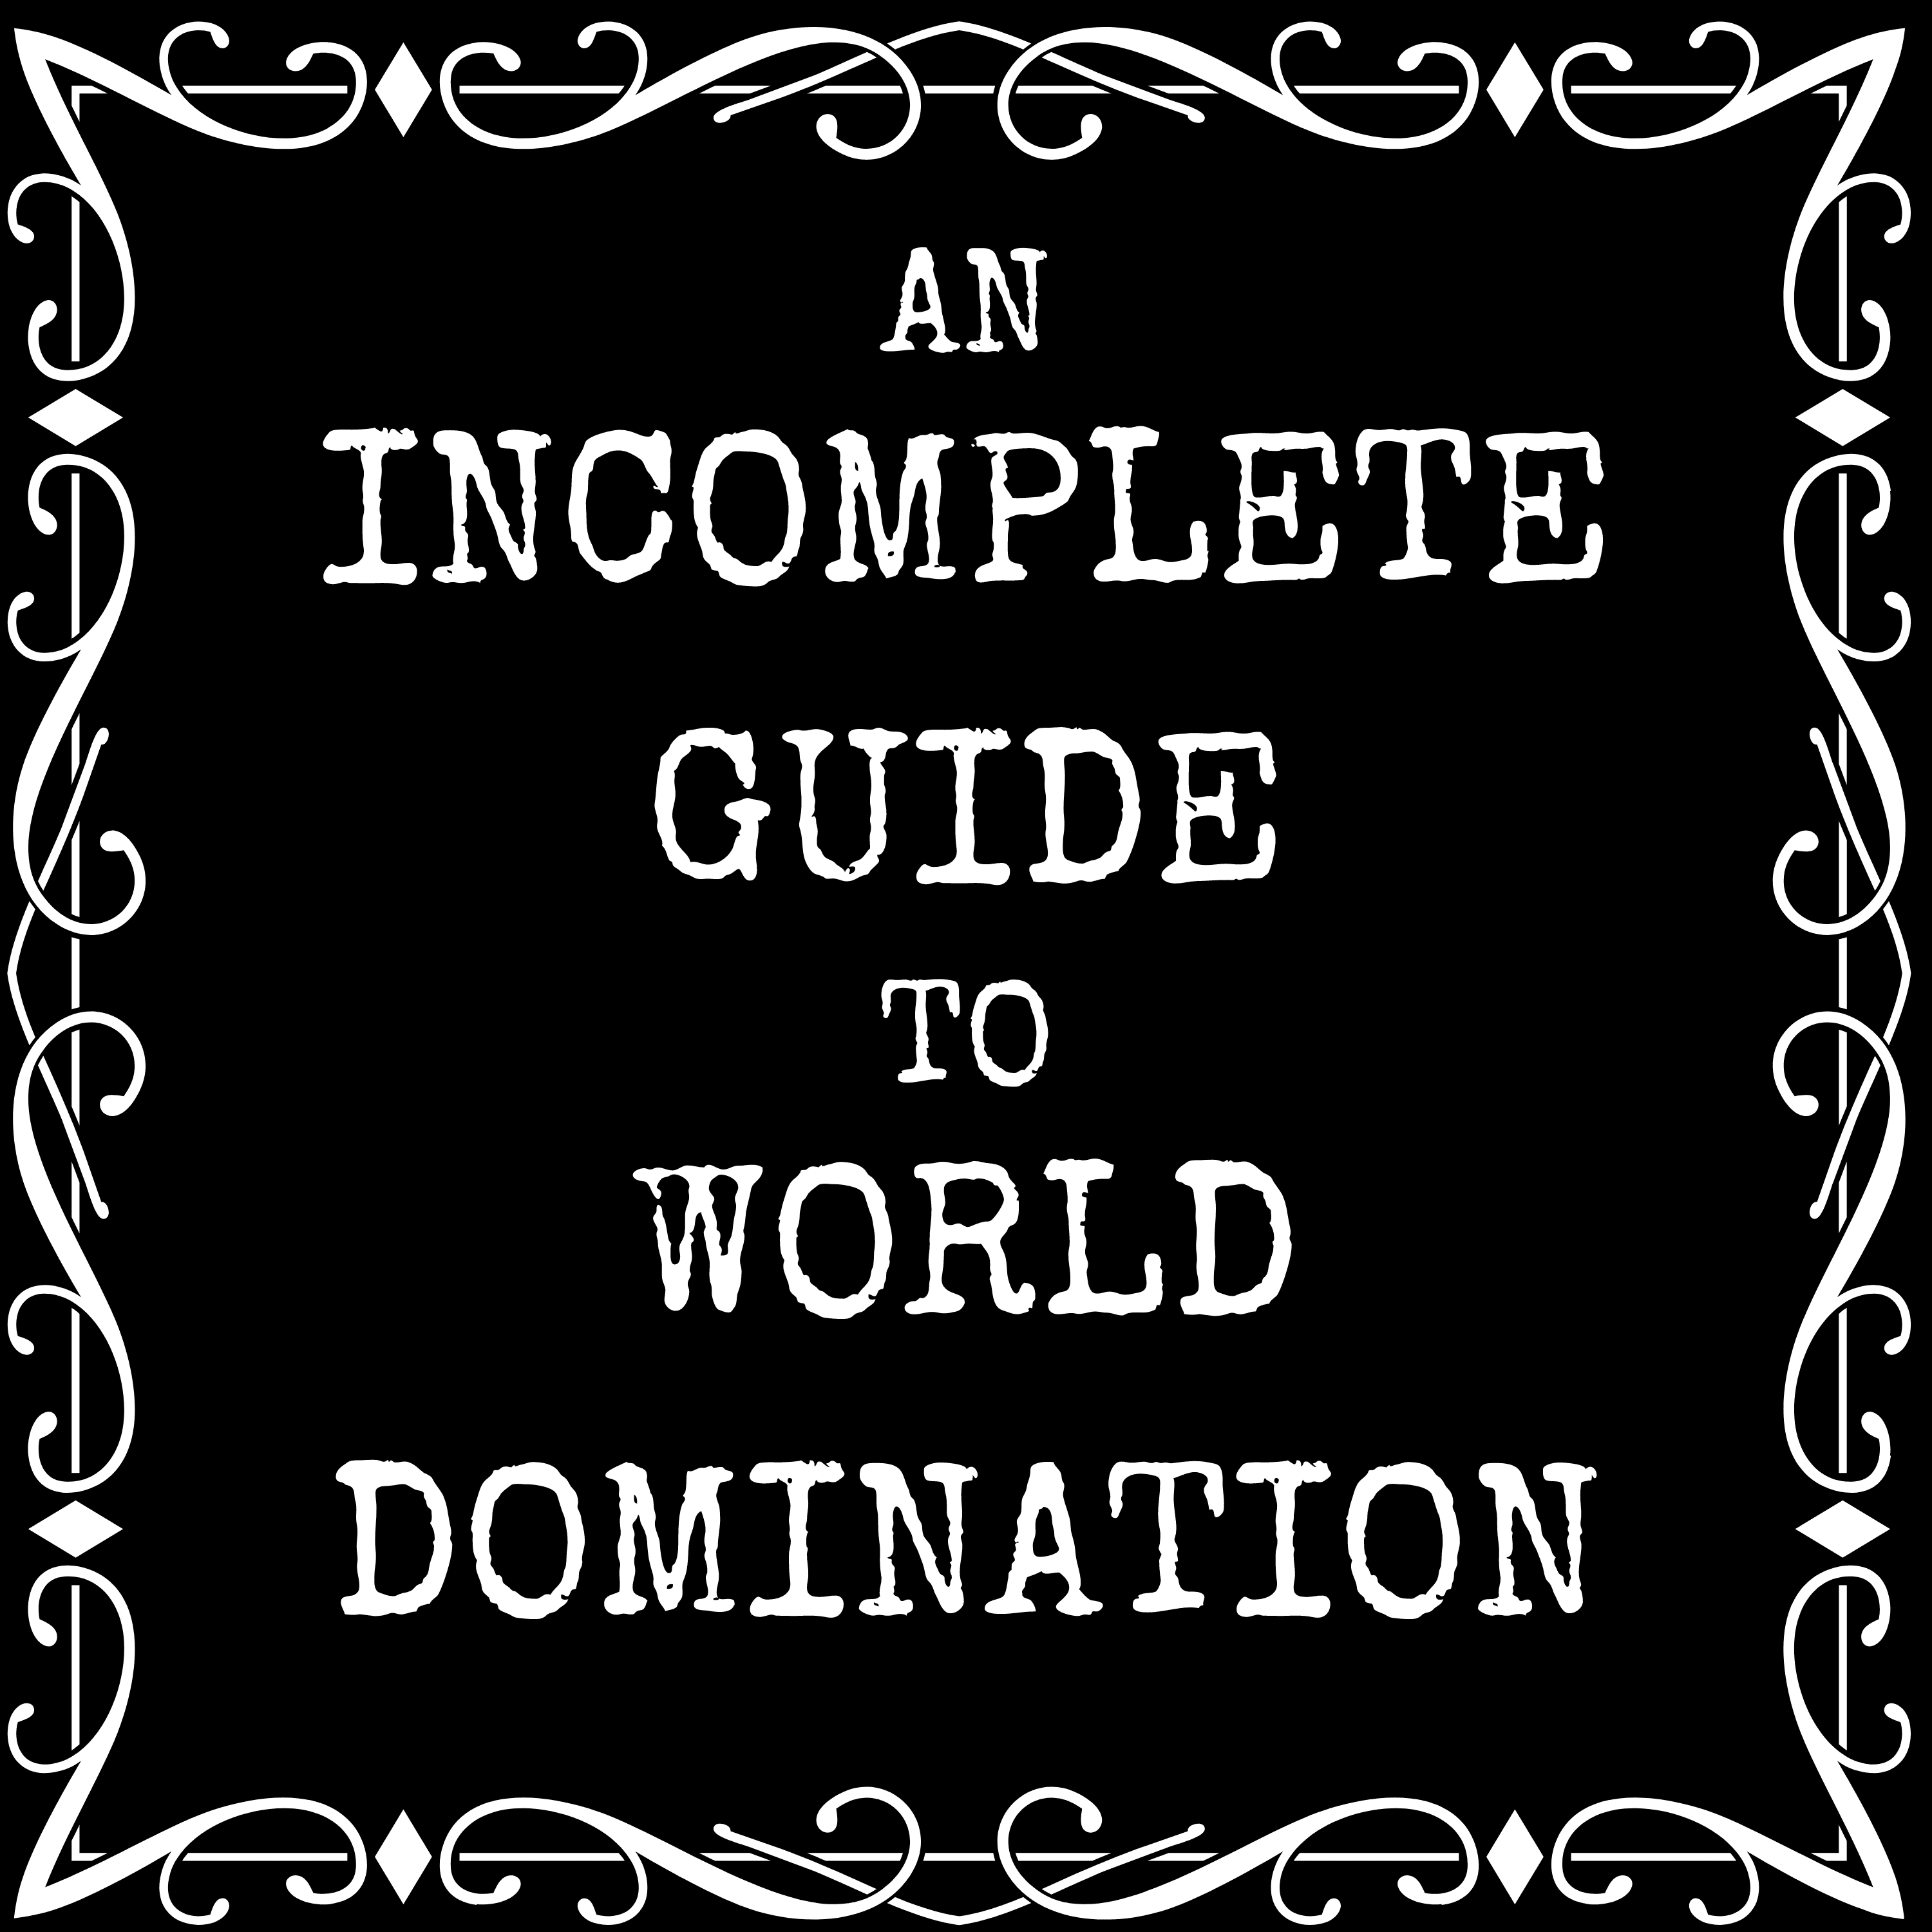 An Incomplete Guide to World Domination